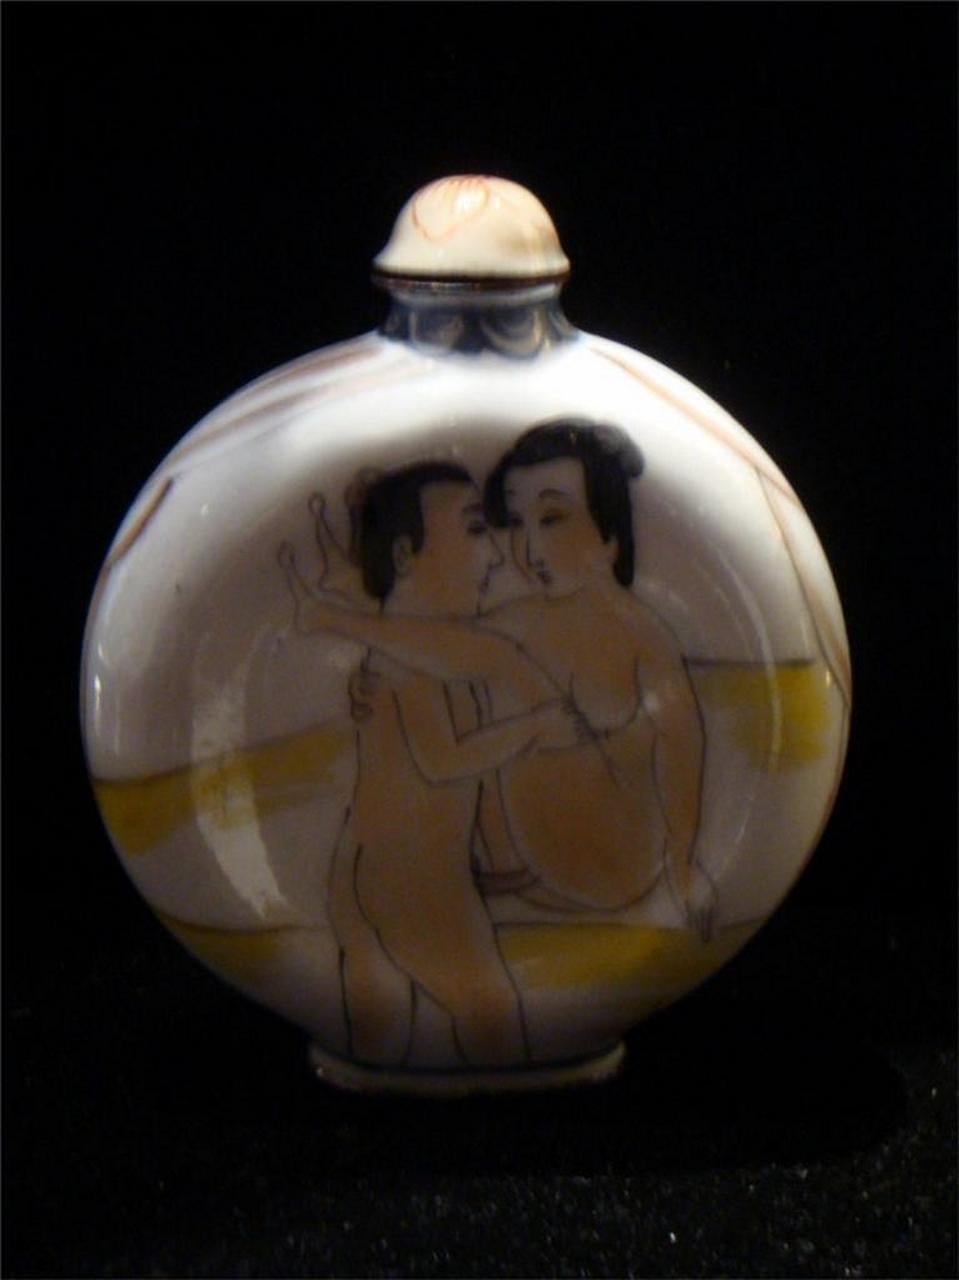 The Following Item we are offering is an Elaborately Decorated Spectacular Estate Hand Carved and Handpainted Painted Porcelain Chinese Erotic Snuff Bottle. Taken out of an Private Sutton Place Collection in NYC. Originally Priced at $950. Truly an